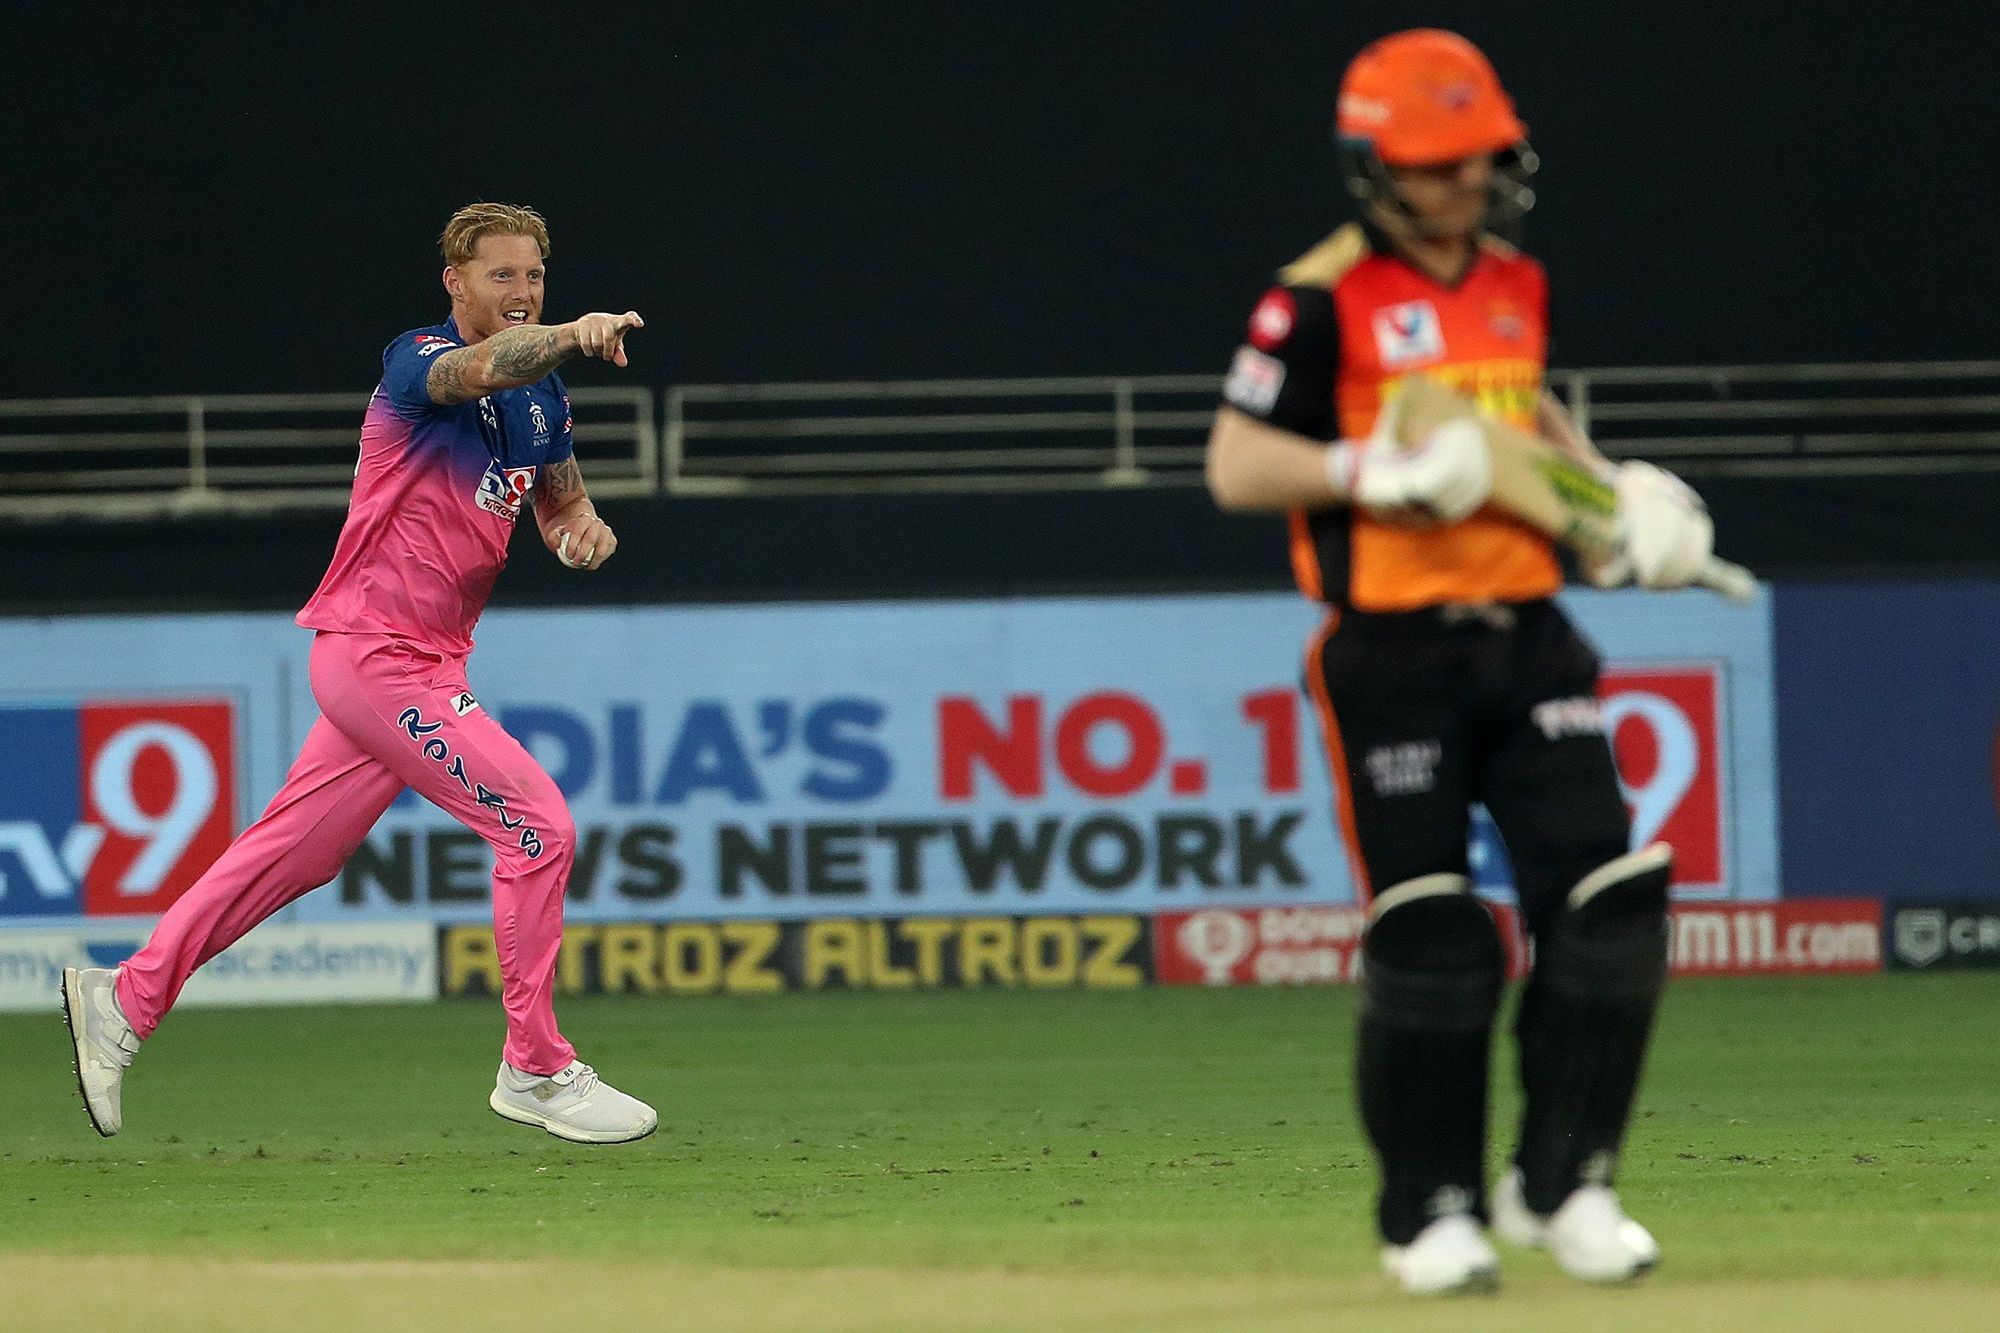 IPL 2020 | With someone bowling at 150kphs, you can't do much, insists David Warner